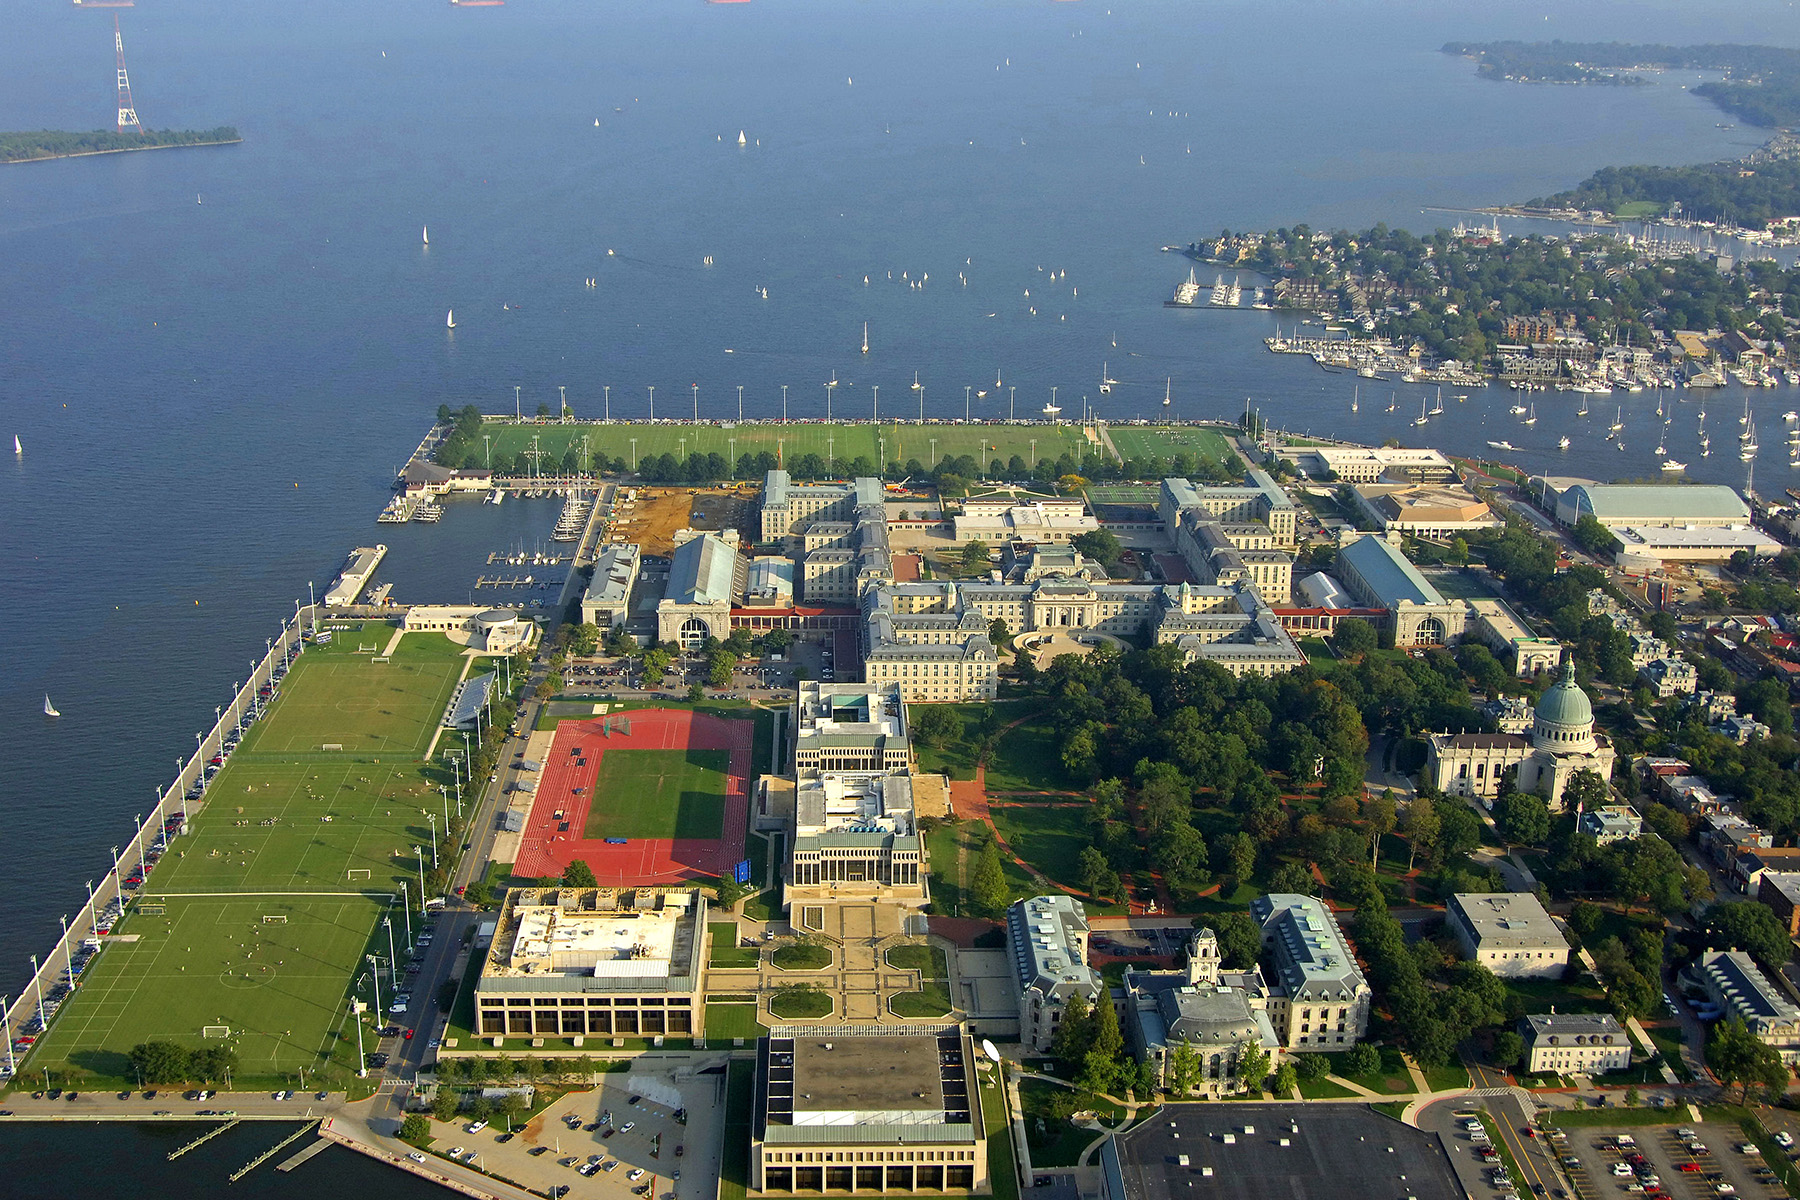 The photograph shows how close the U.S. Naval Academy is to water. 